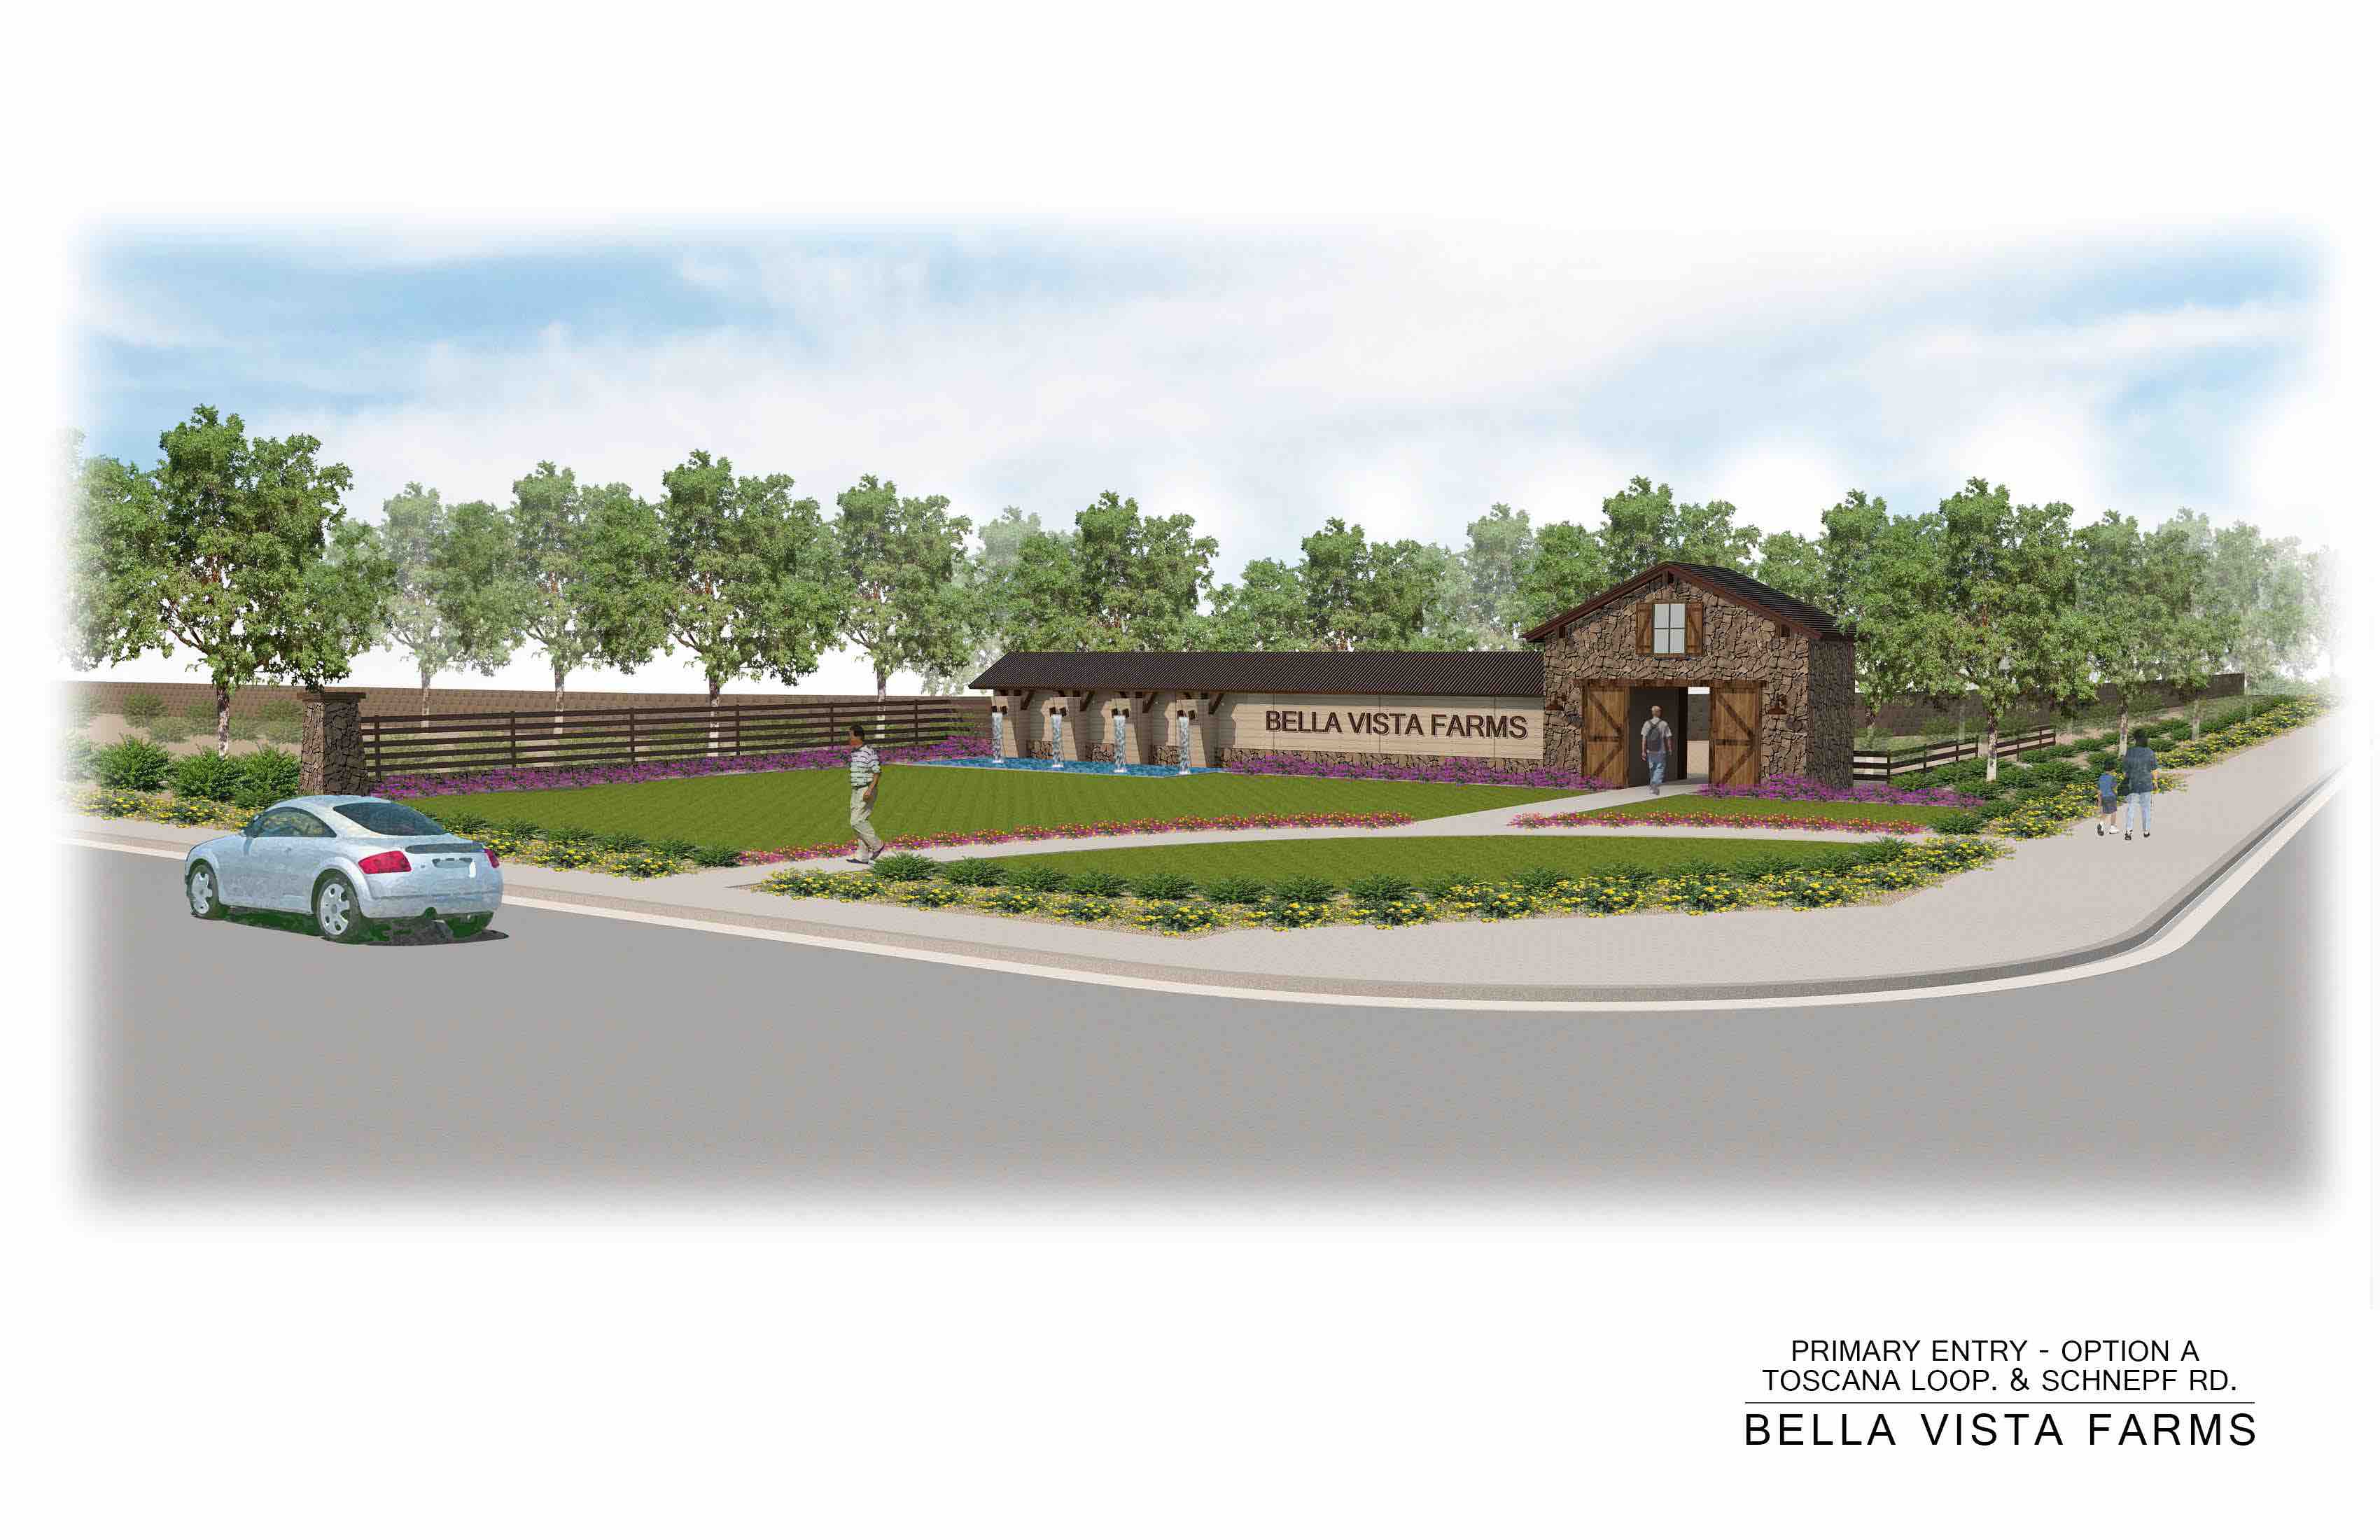 Developer Builder Tan New the Pointe Homes in San at Bella Farms Vista on Kicks-off Tri Valley Construction - Homes Magazine and